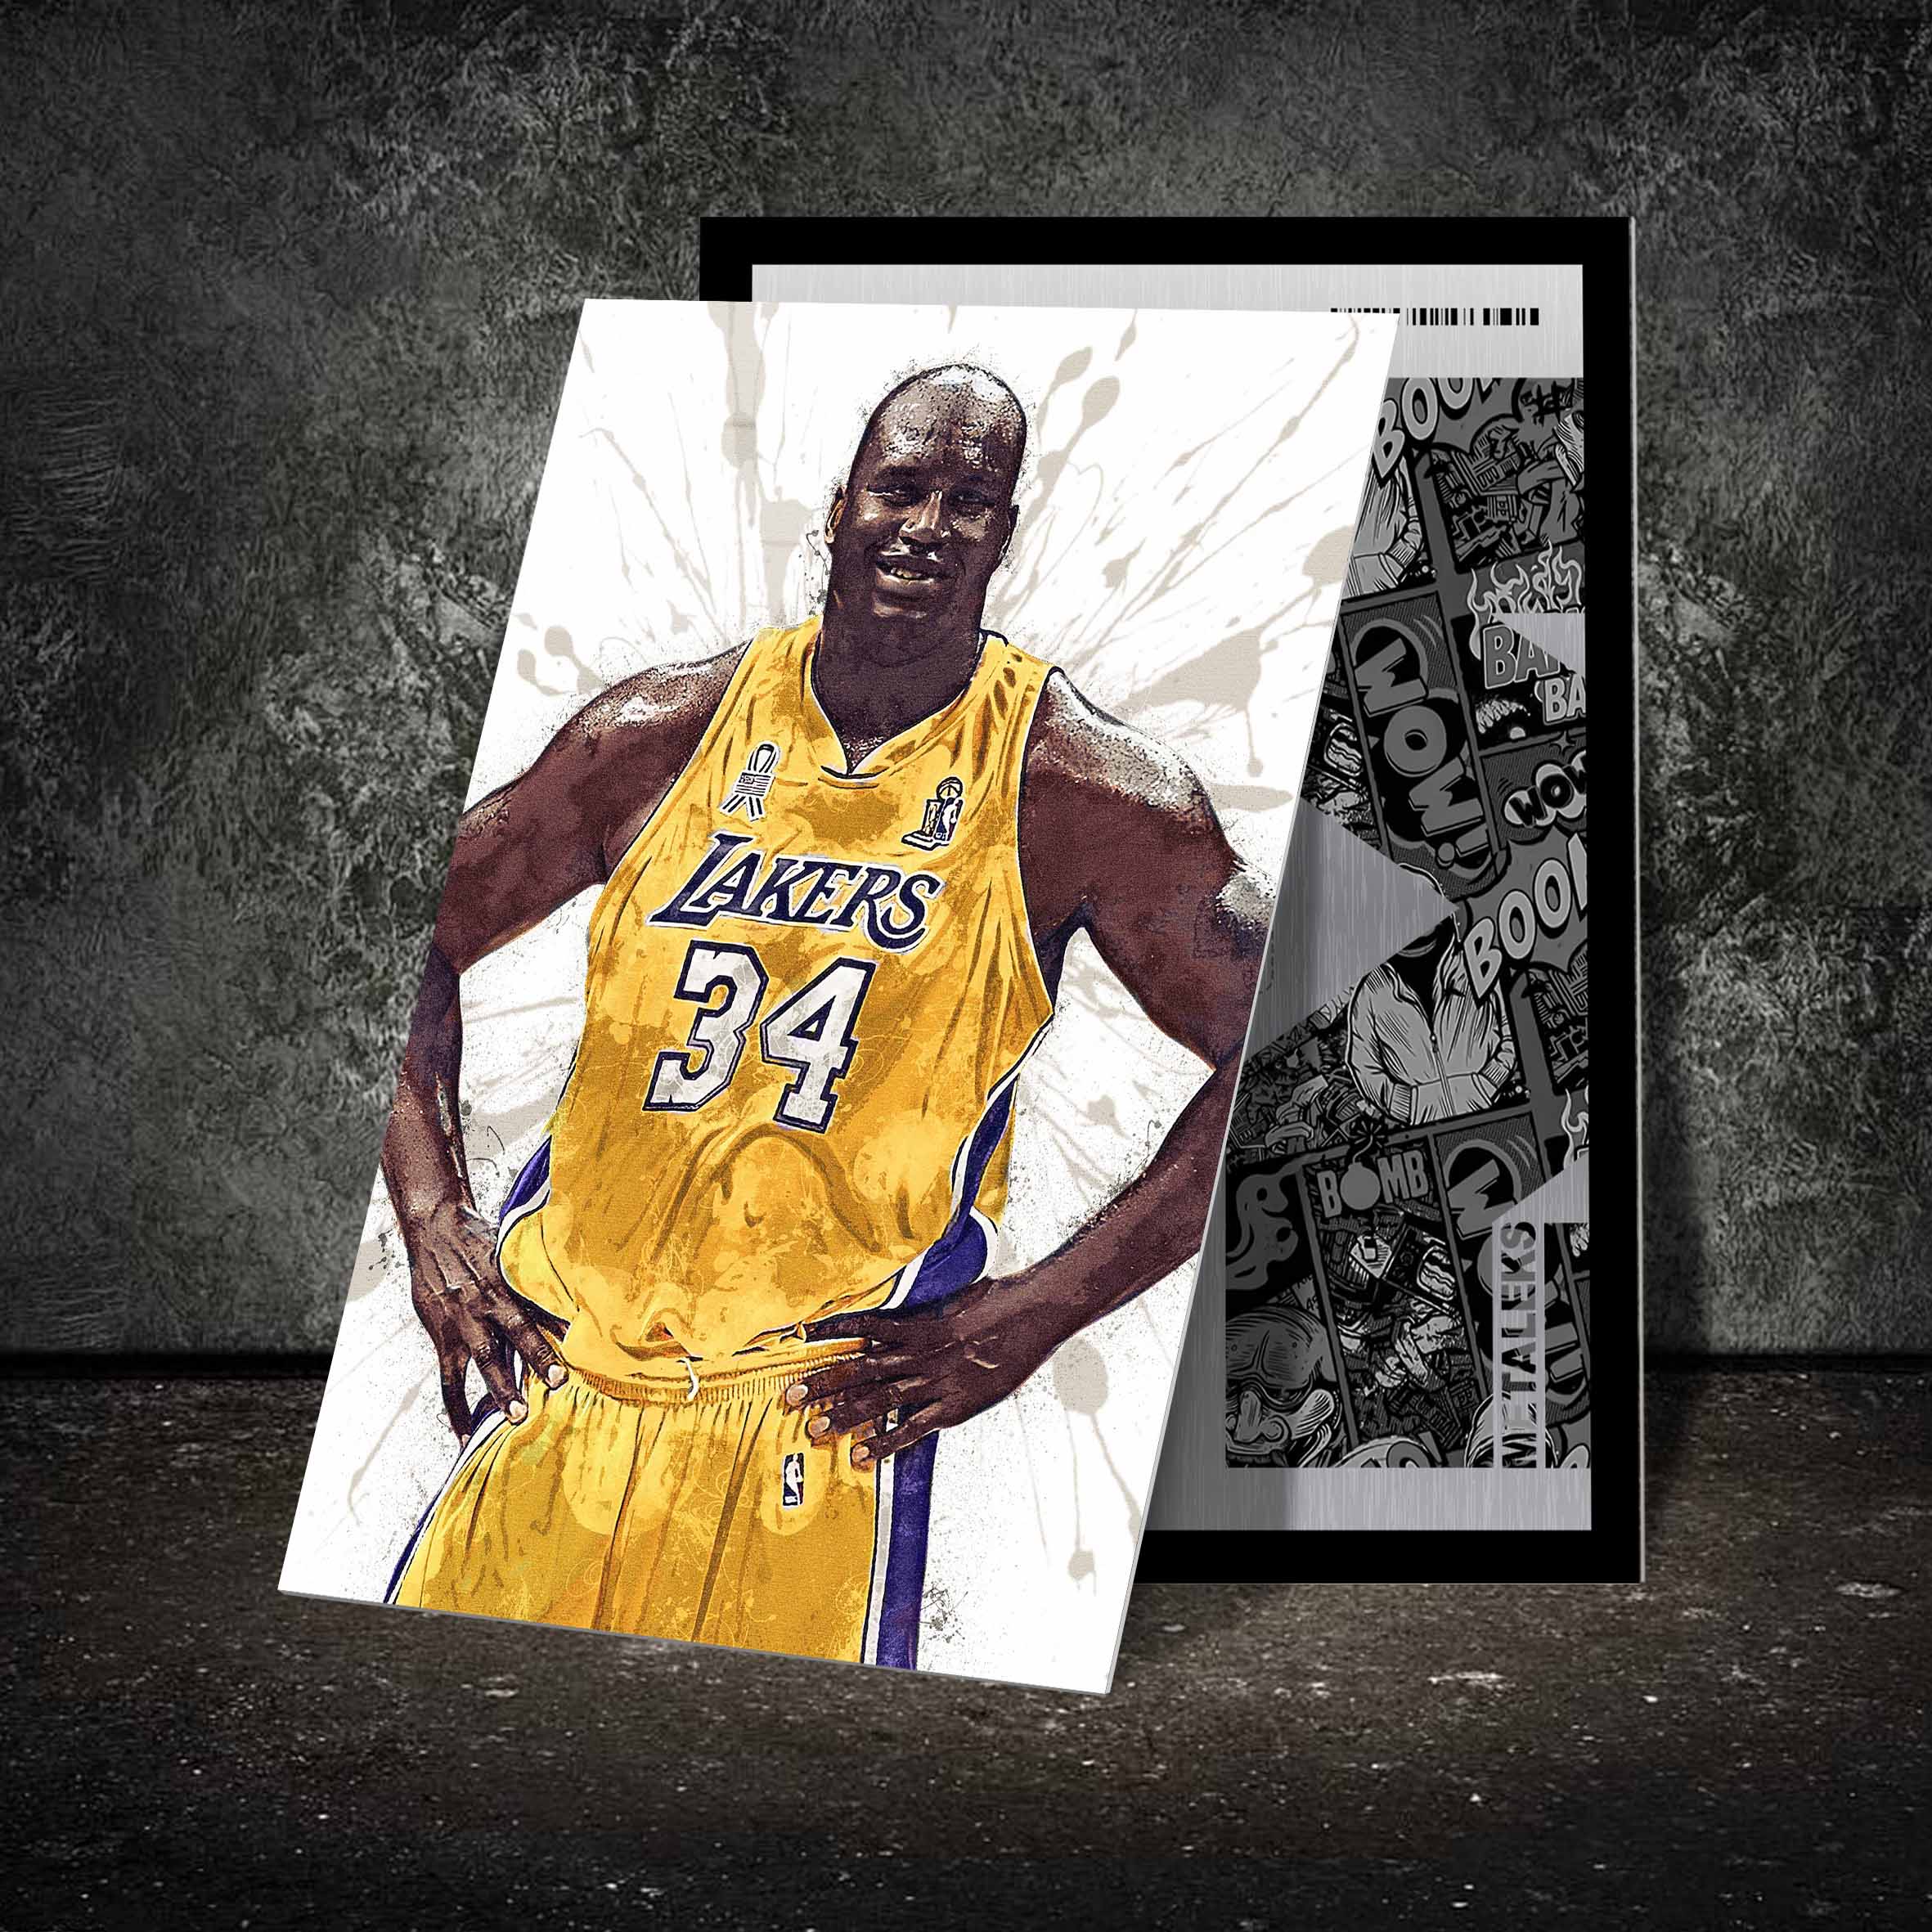 Shaquille O’Neal LA Lakers-designed by @Hoang Van Thuan